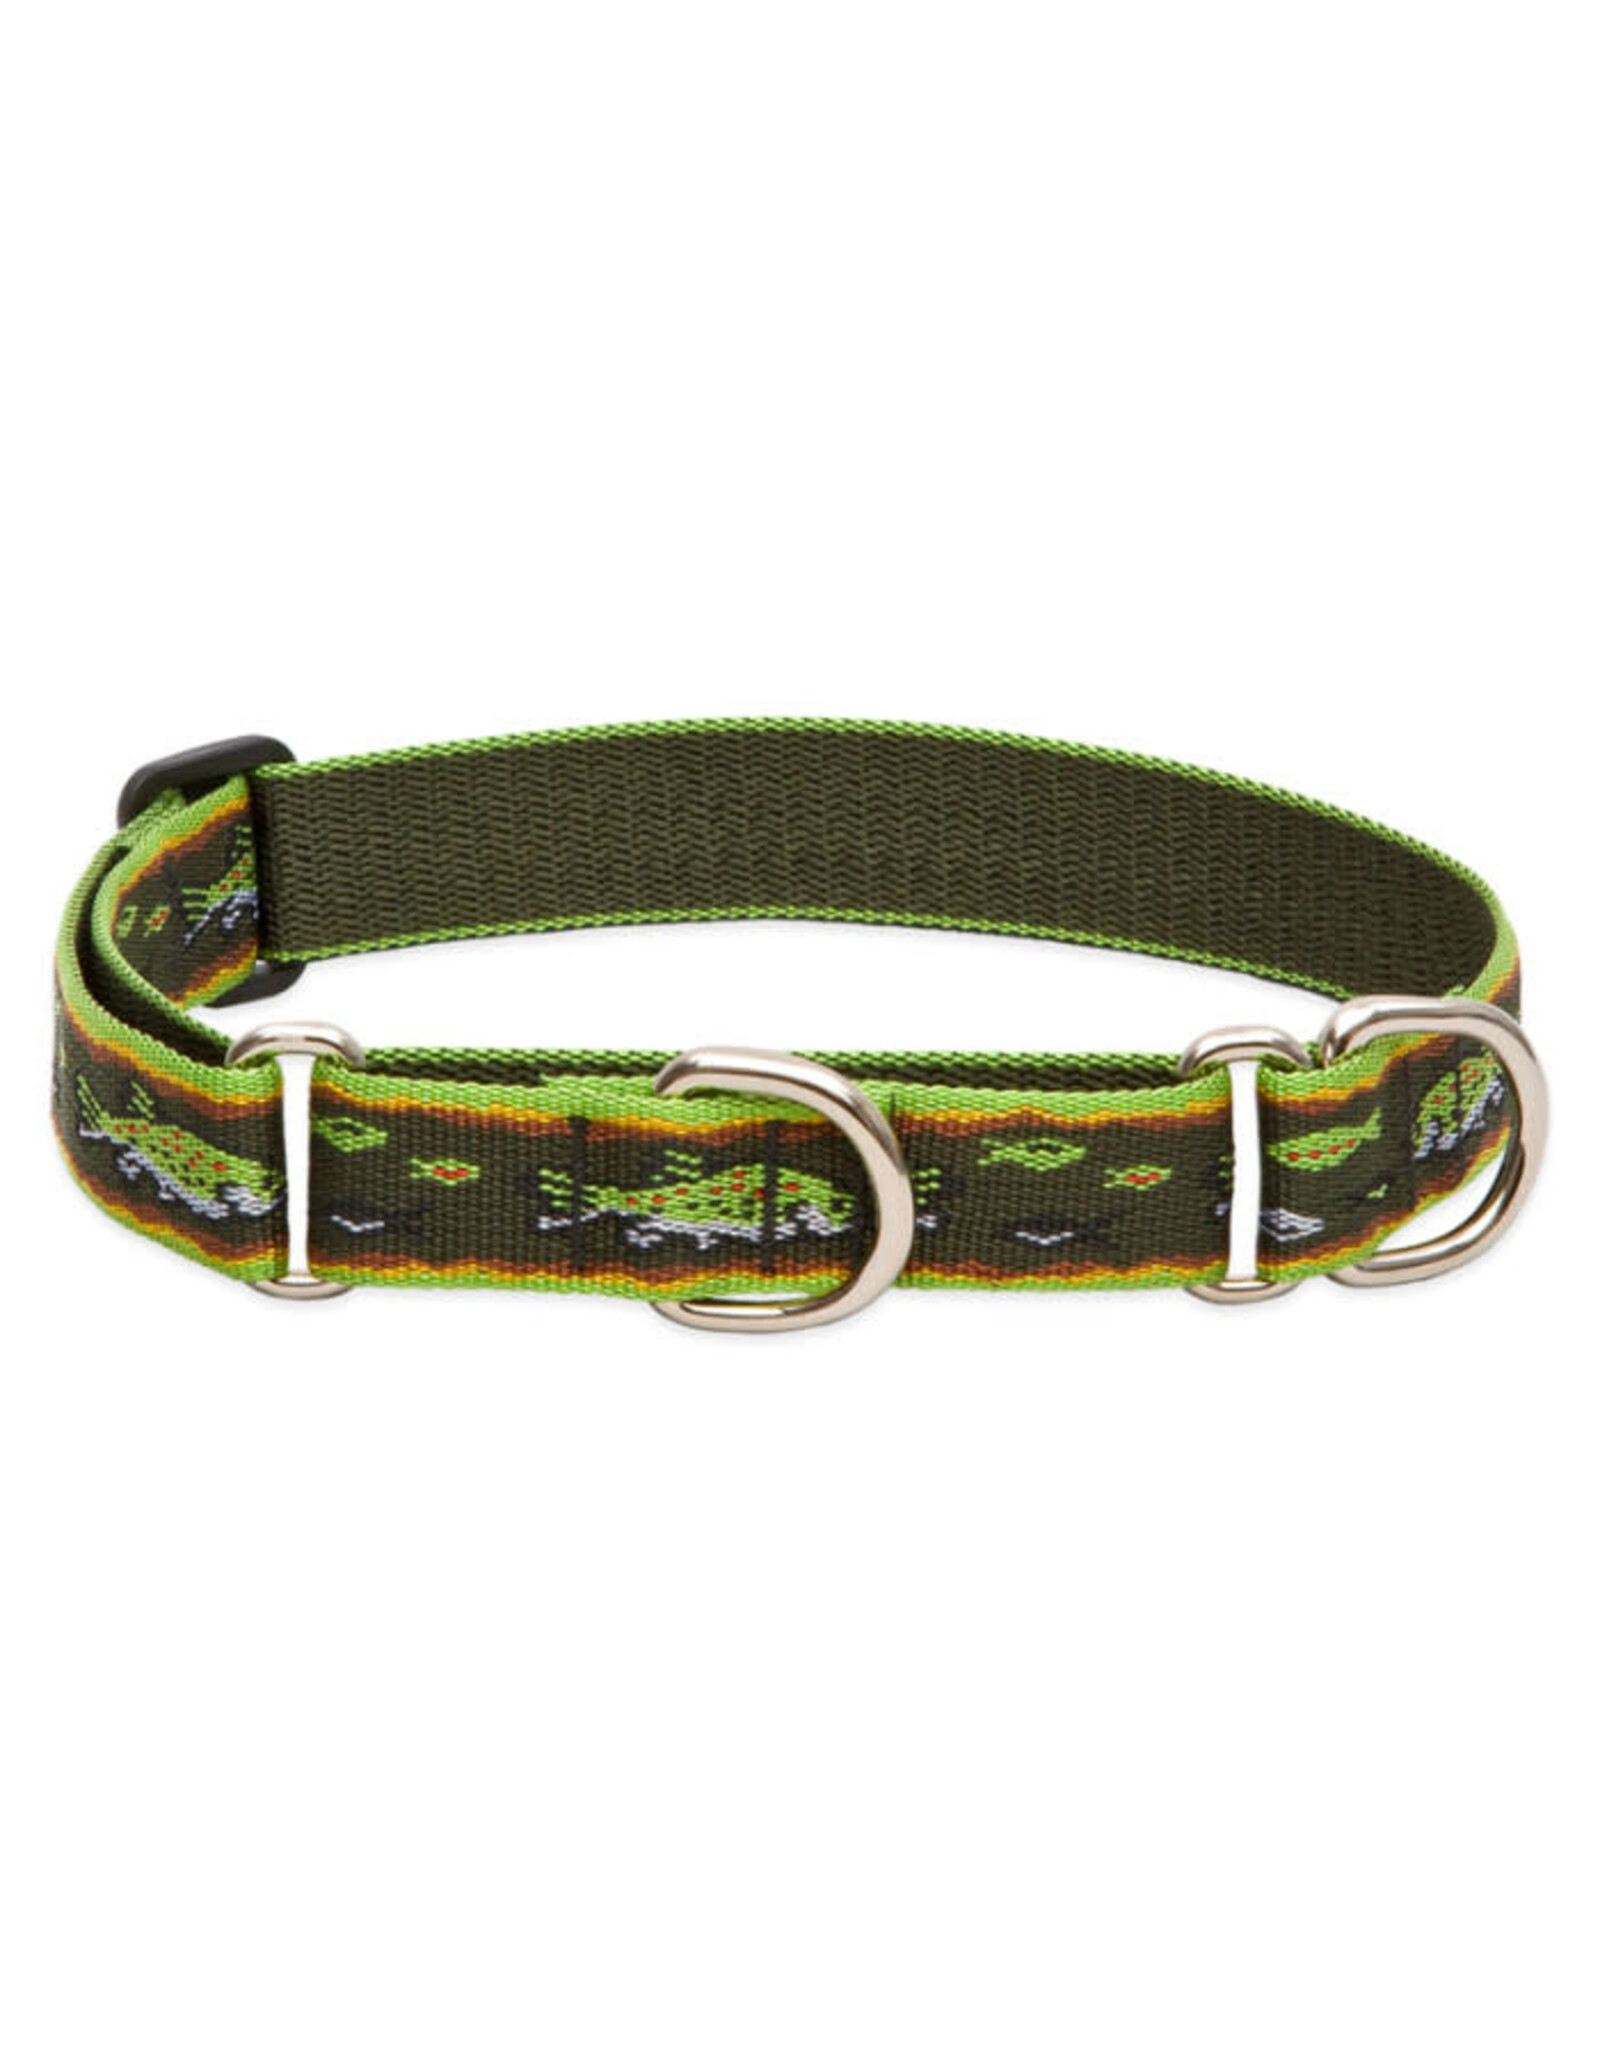 LUPINE LUPINE 1IN TROUT 15-22 MARTINGALE COLLAR